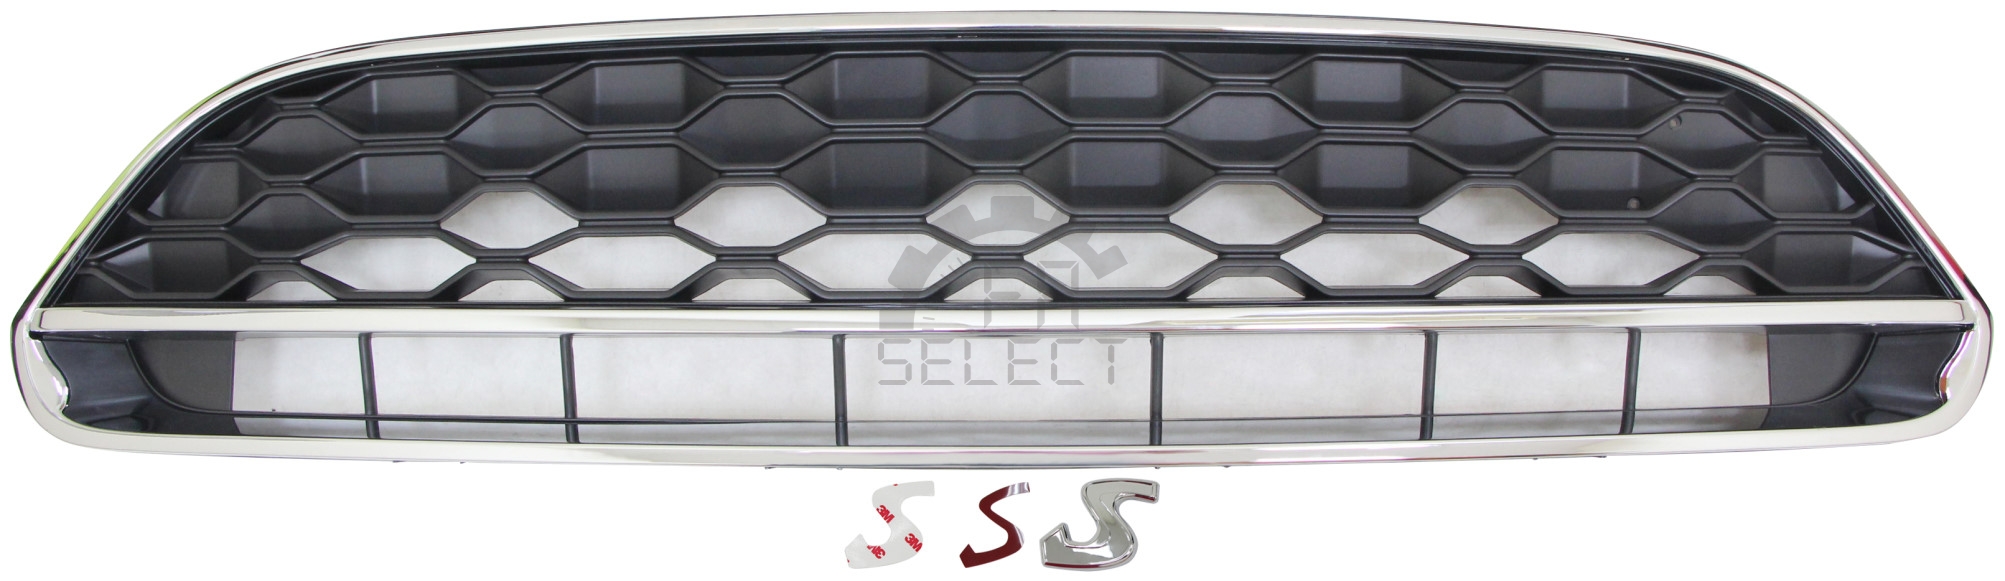 SPORT GRILLE